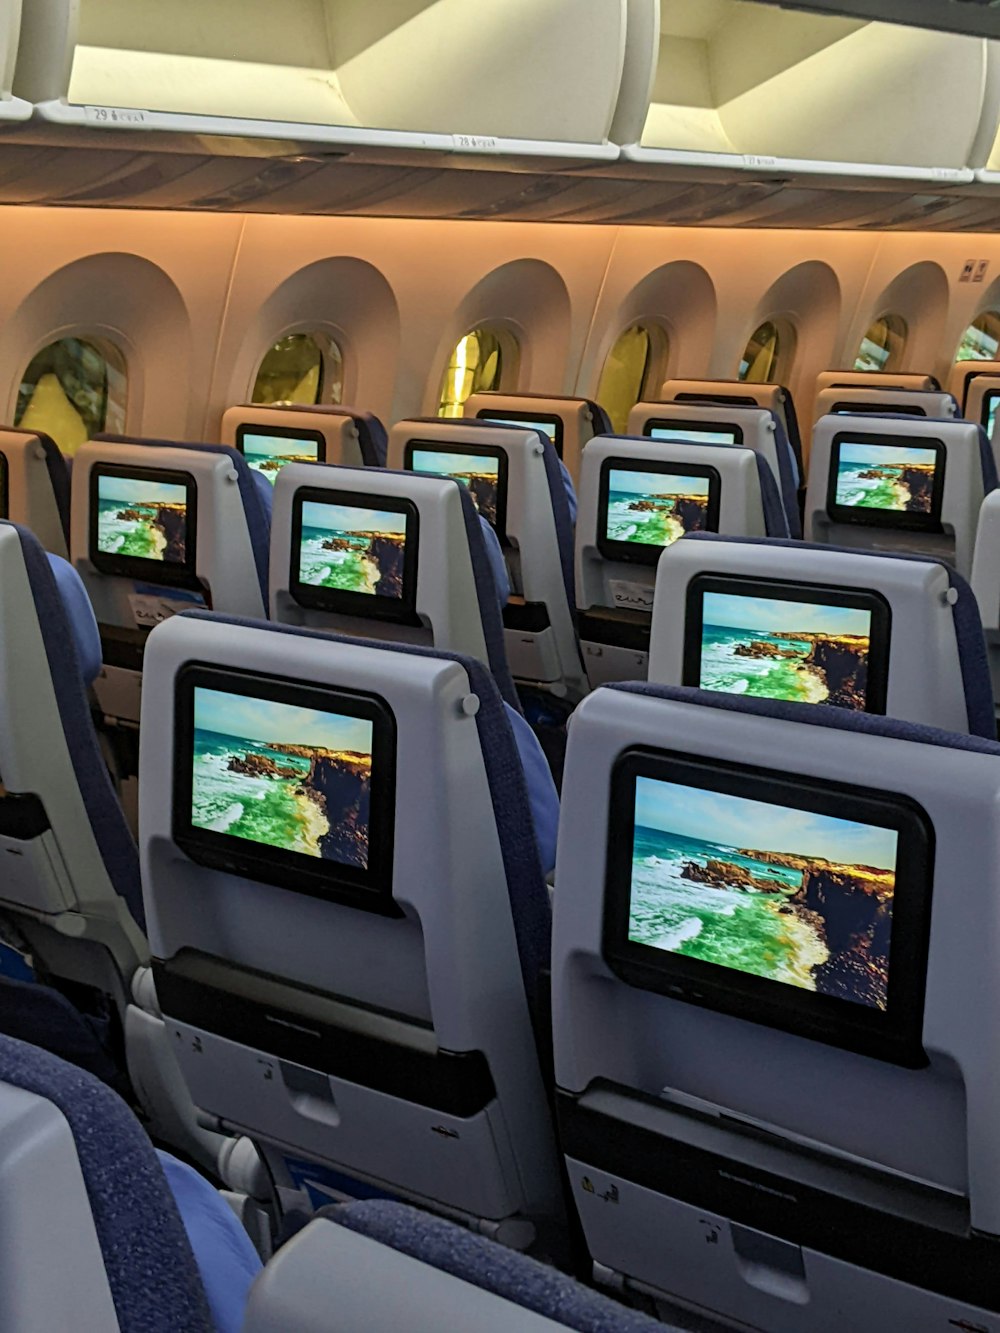 a row of seats with televisions on them